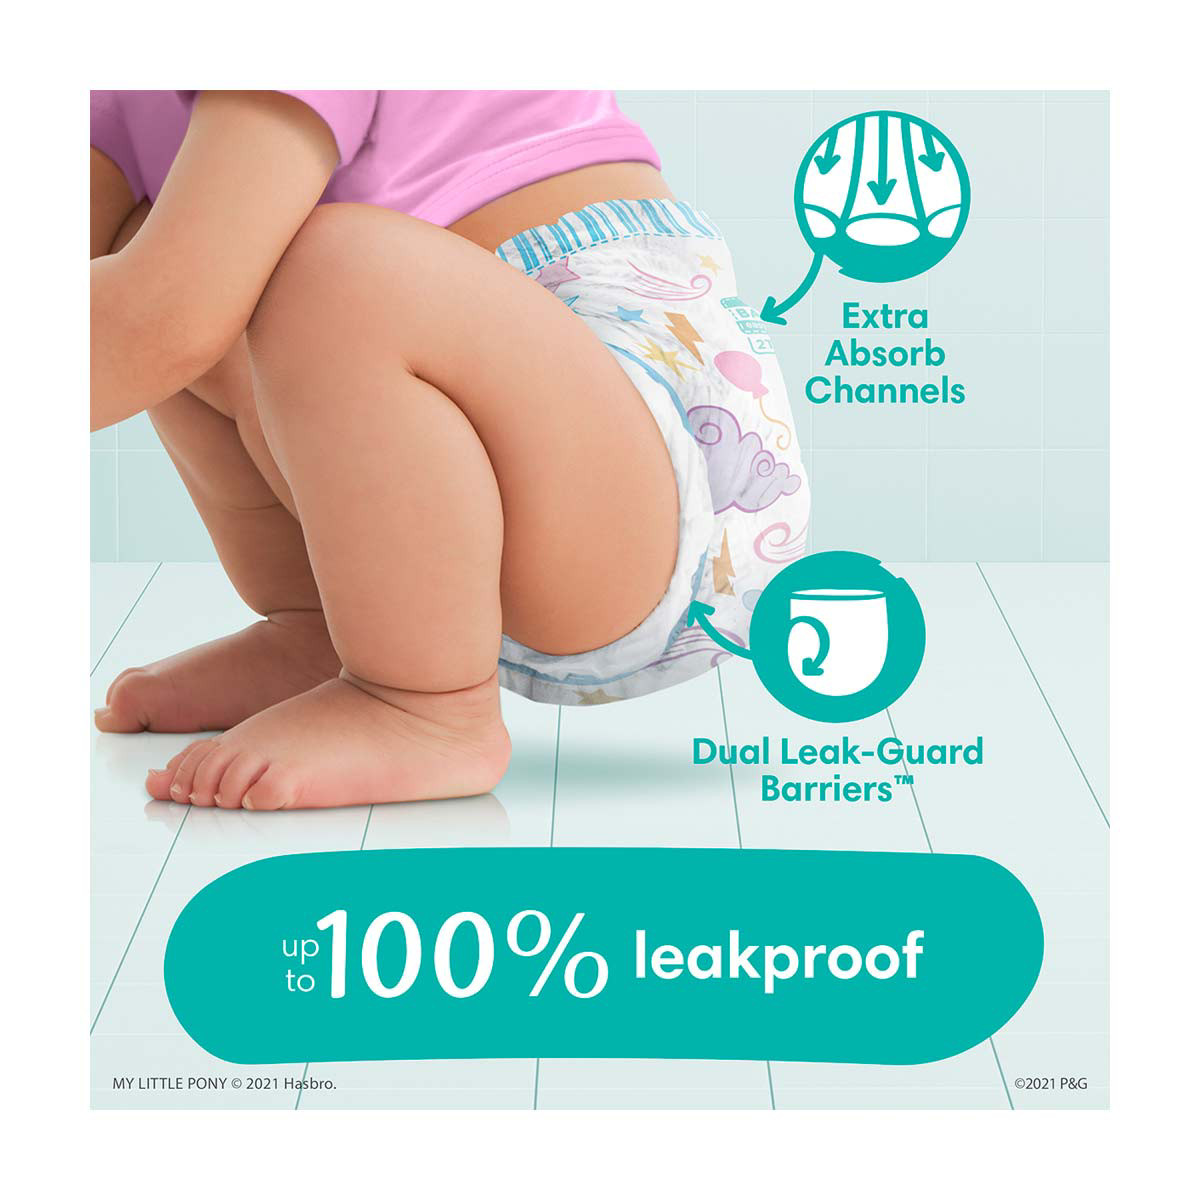 Pampers Girls Easy Ups Training Underwear 3T-4T (Size 5), 72 Count (Old  Version),  price tracker / tracking,  price history charts,   price watches,  price drop alerts